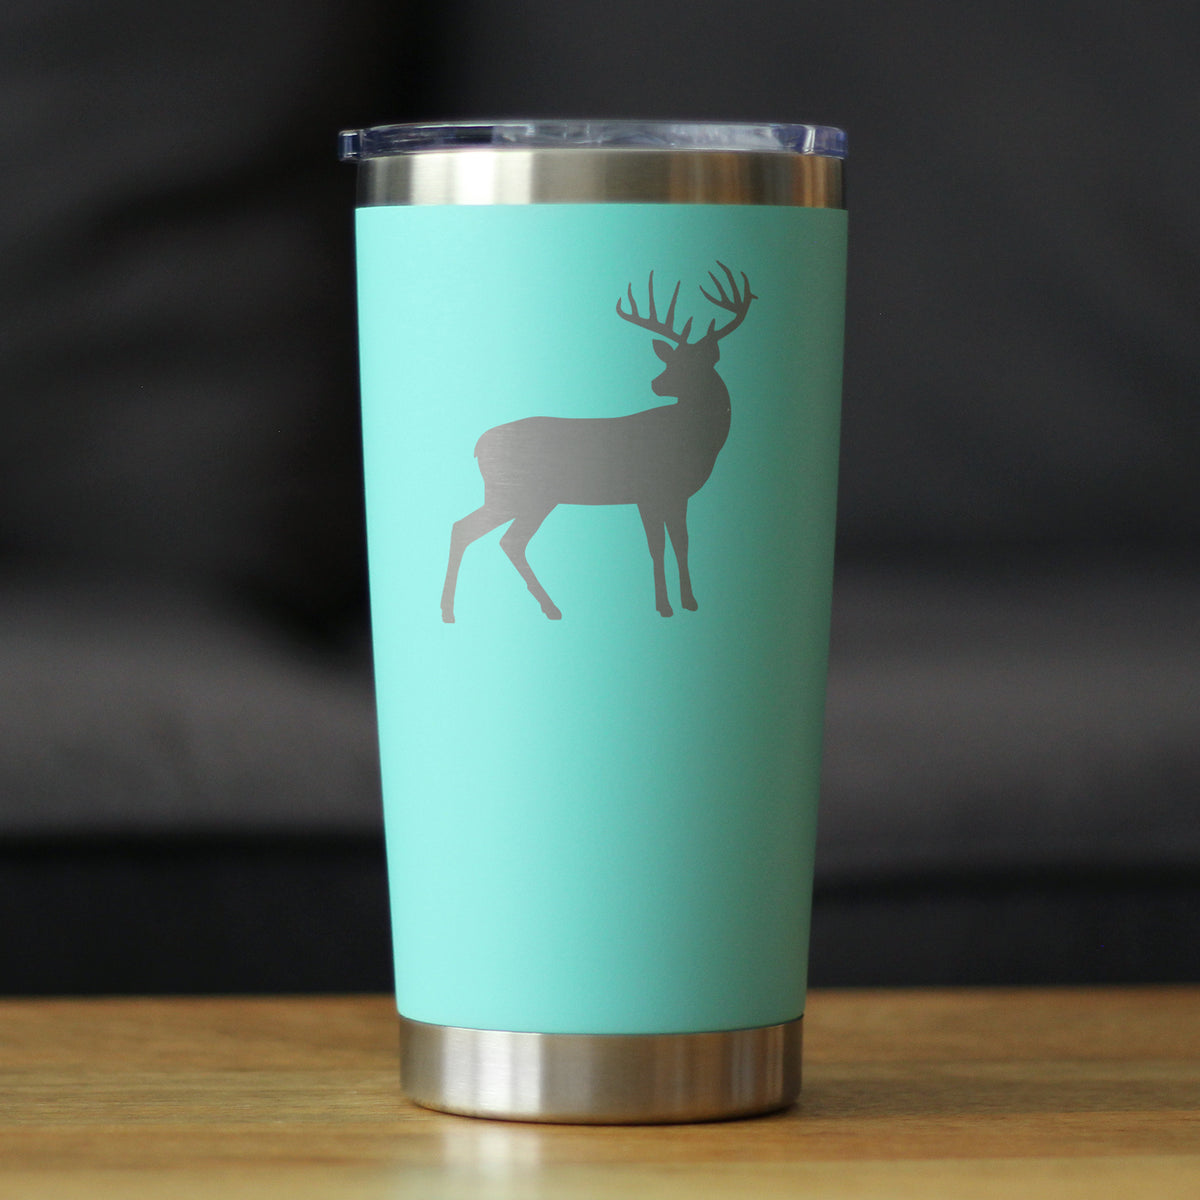 Deer Silhouette - Insulated Coffee Tumbler Cup with Sliding Lid - Stainless Steel Travel Mug - Rustic Outdoors Gifts and Decor for Women and Men